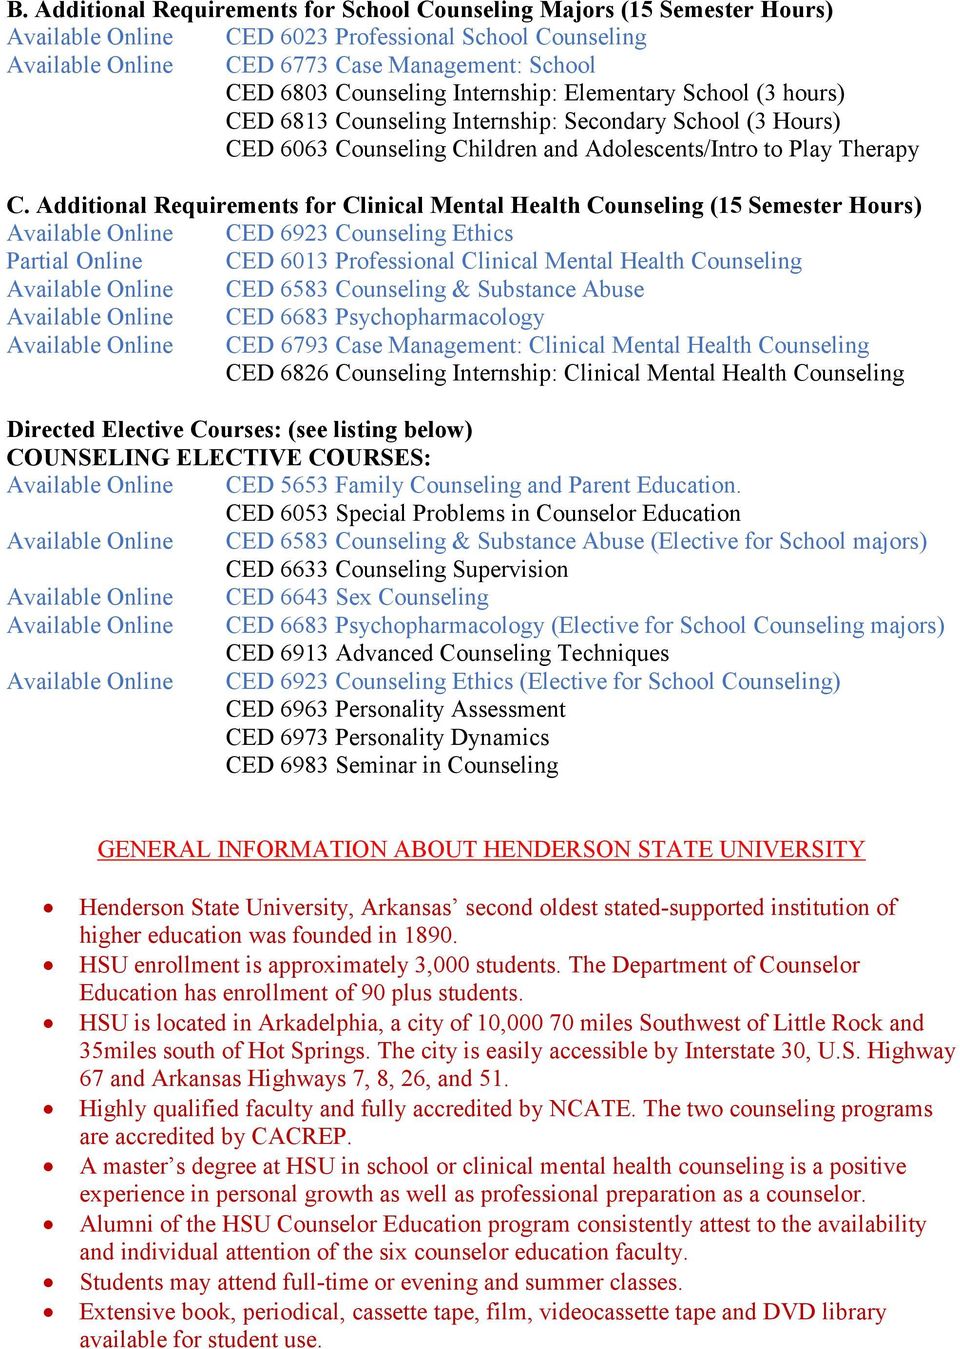 Additional Requirements for Clinical Mental Health Counseling (15 Semester Hours) Available Online CED 6923 Counseling Ethics Partial Online CED 6013 Professional Clinical Mental Health Counseling